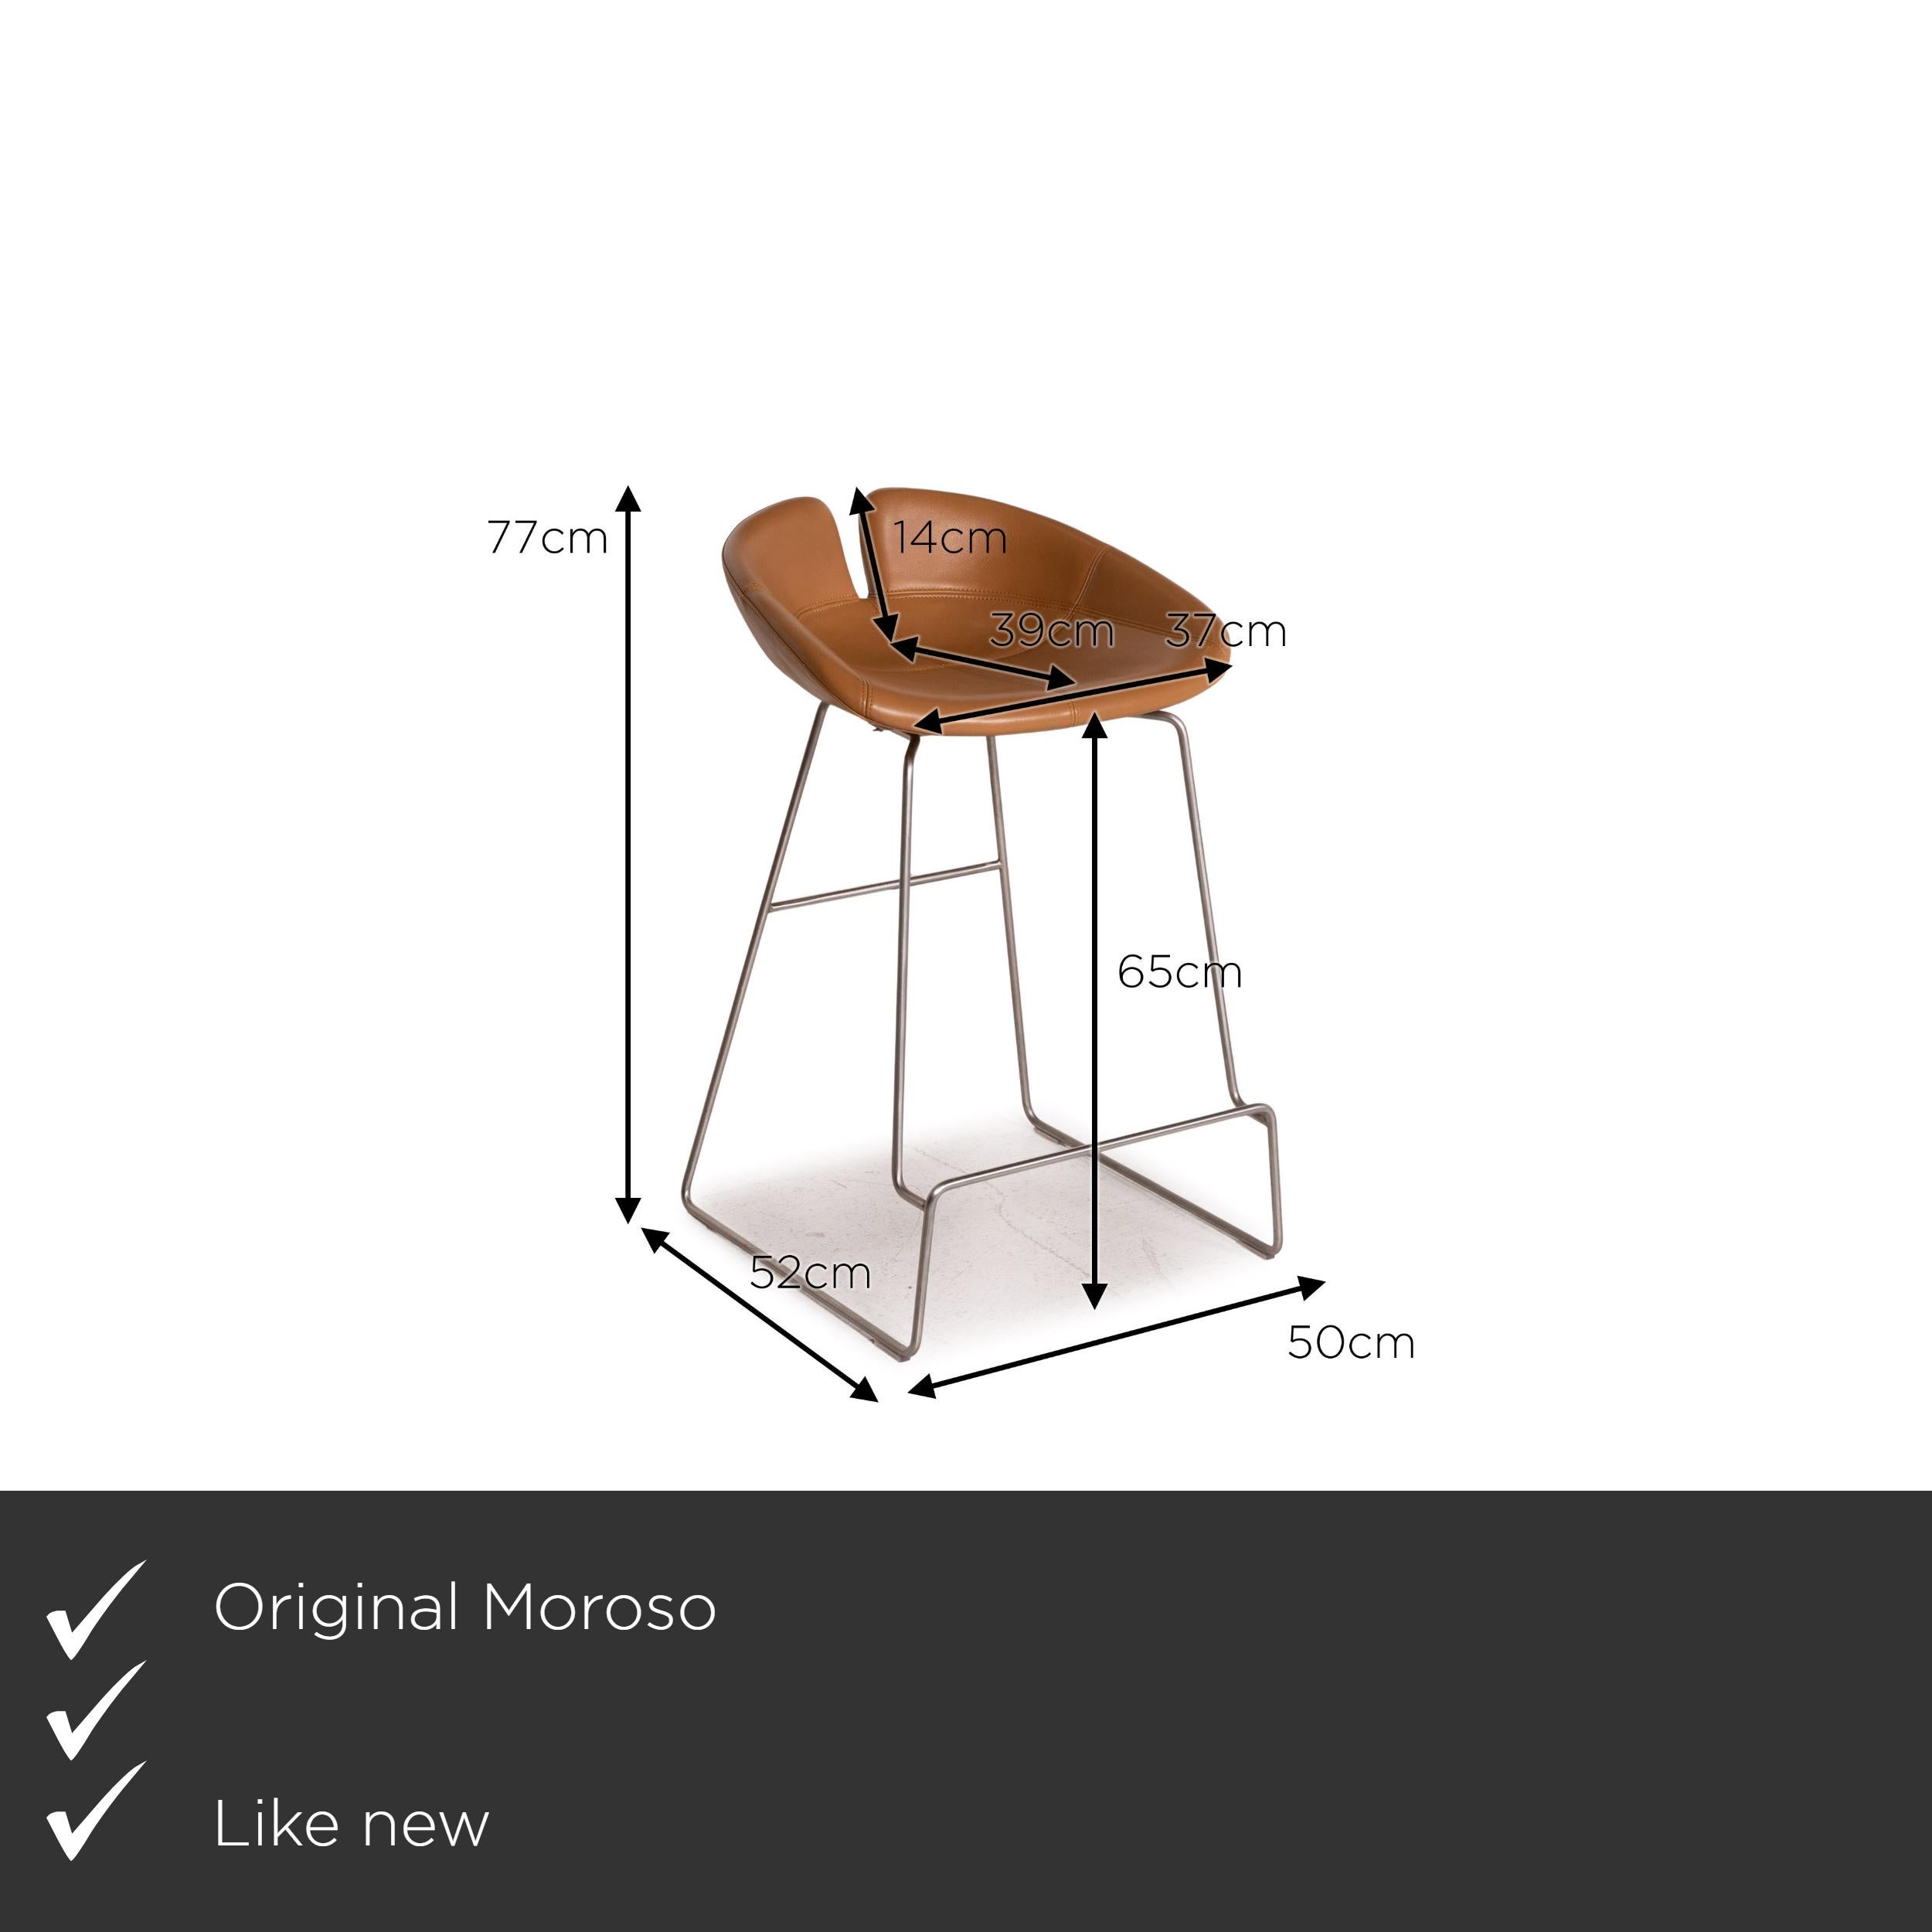 We present to you a Moroso Fjord leather bar stool cognac brown chair.
  
 

 Product measurements in centimeters:
 

 depth: 52
 width: 50
 height: 77
 seat height: 65
 rest height: 72
 seat depth: 39
 seat width: 37.
  